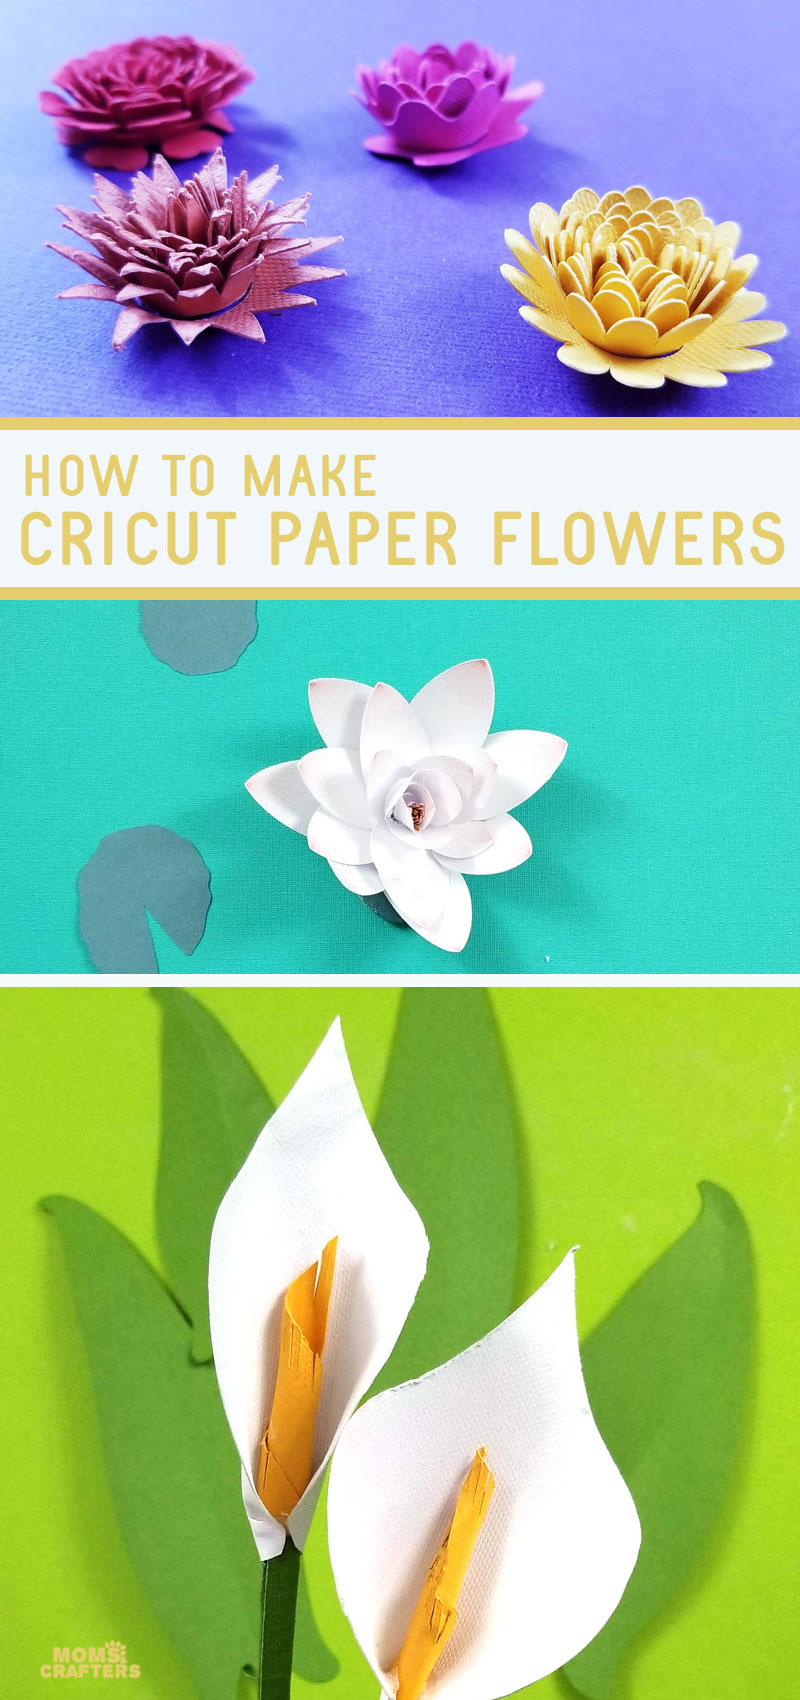 Click to learn how to make paper flowers with cricut - including rolled flowers, a beautiful lotus flower and gorgeous paper calla lilies.